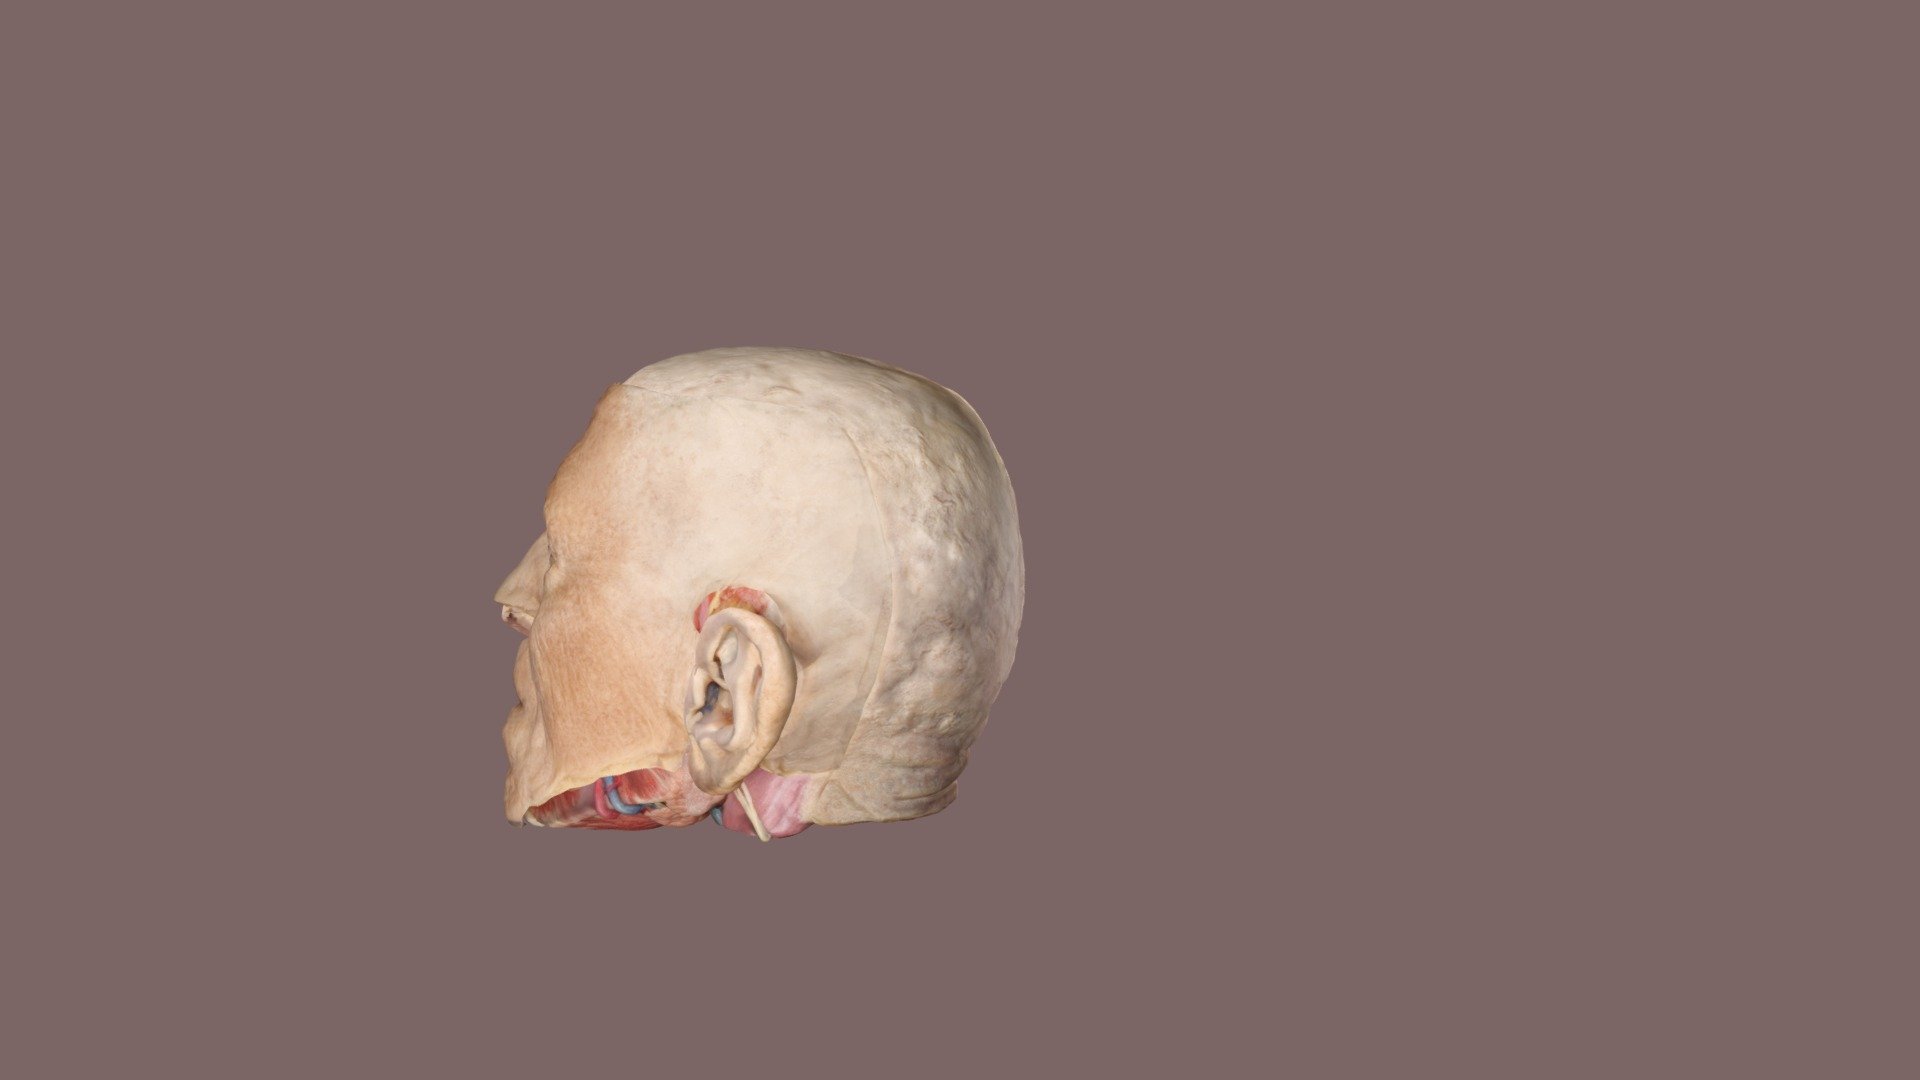 half of a head, with and w/o skin